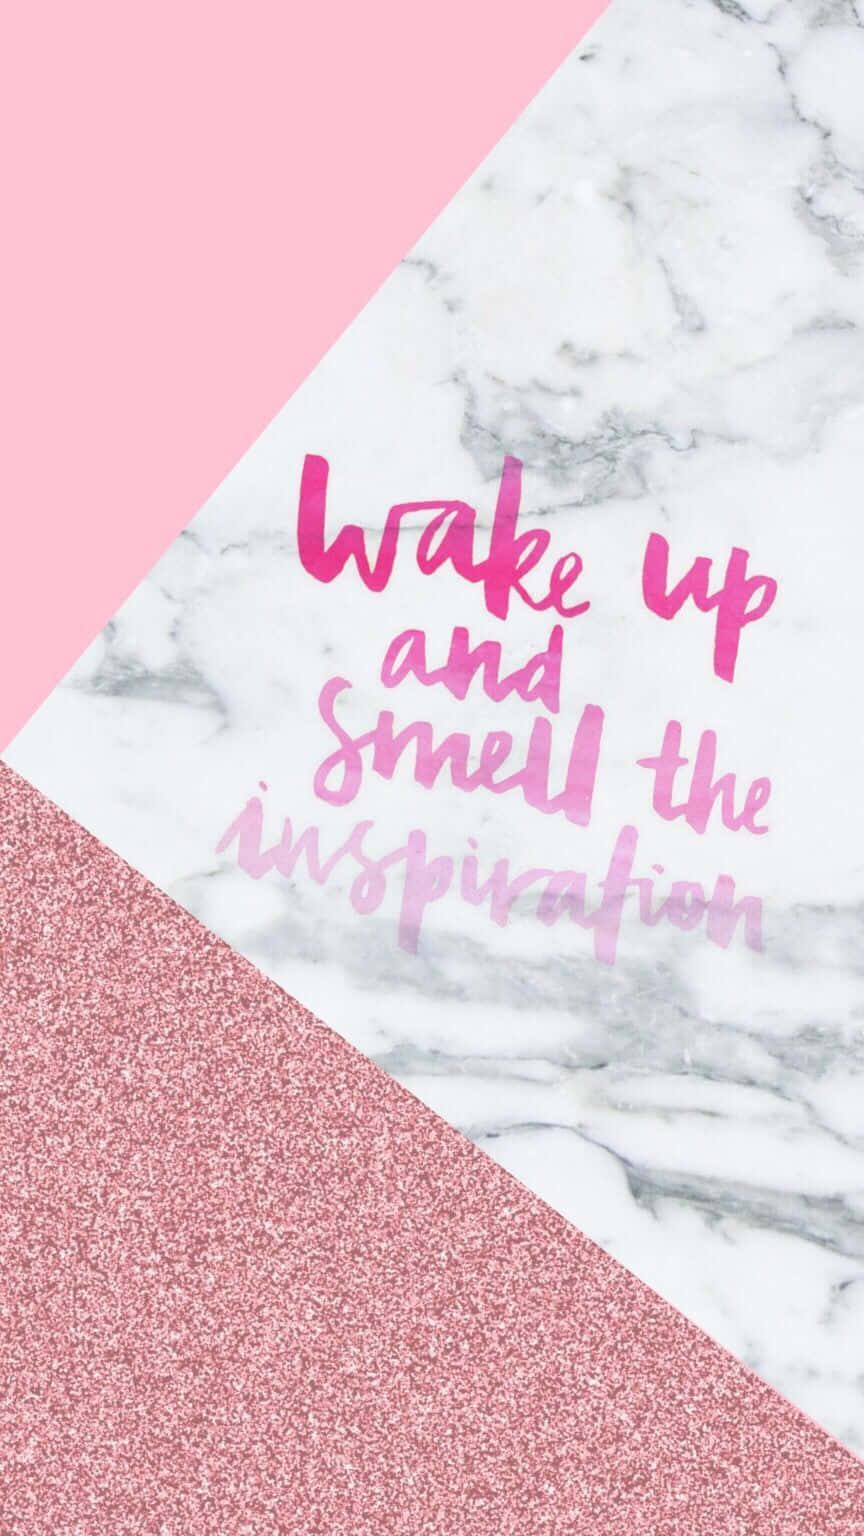 Wake Up And Smell The Inspiration Wallpaper